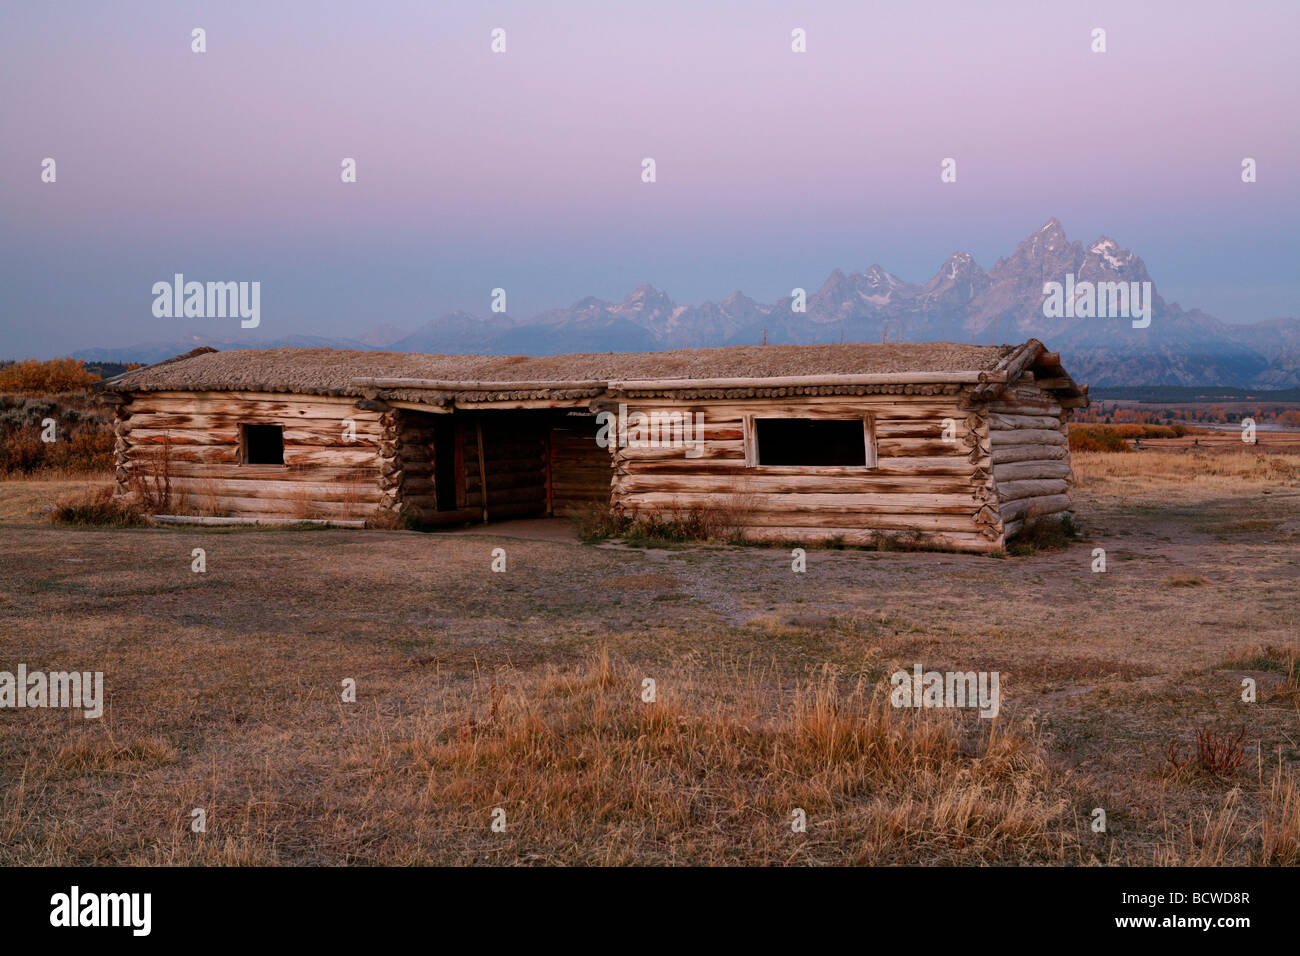 Log cabin in a field with mountains in the background, Cunningham Cabin, Grand Teton National Park, Wyoming, USA Stock Photo